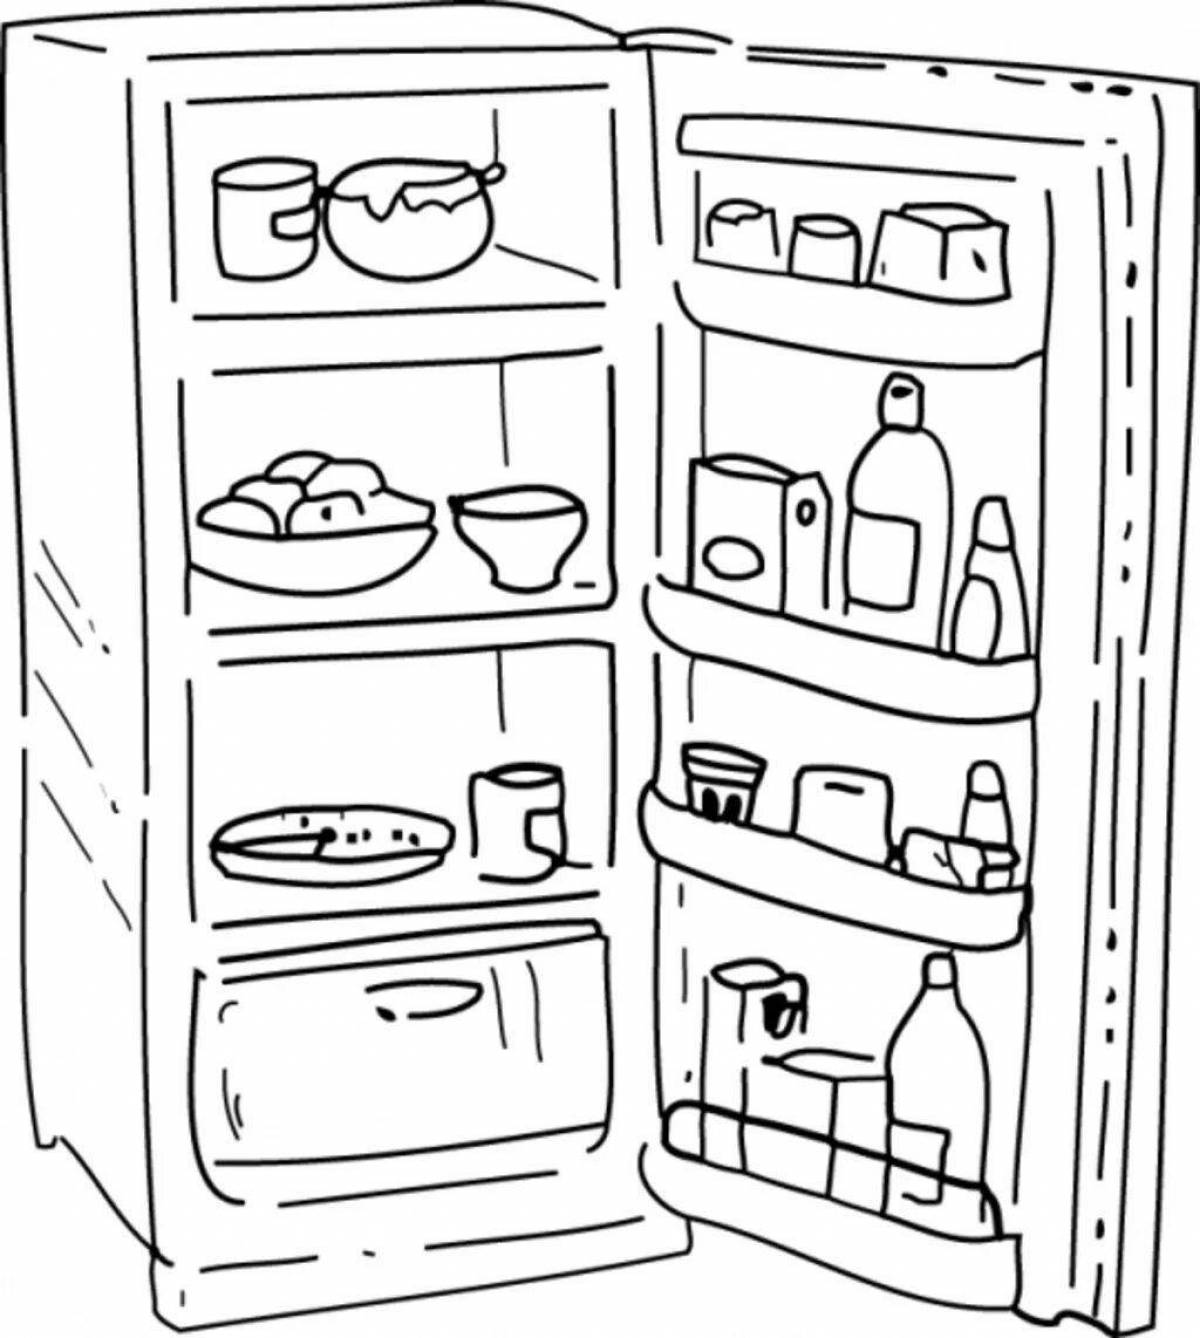 Colorful refrigerator coloring page for kids